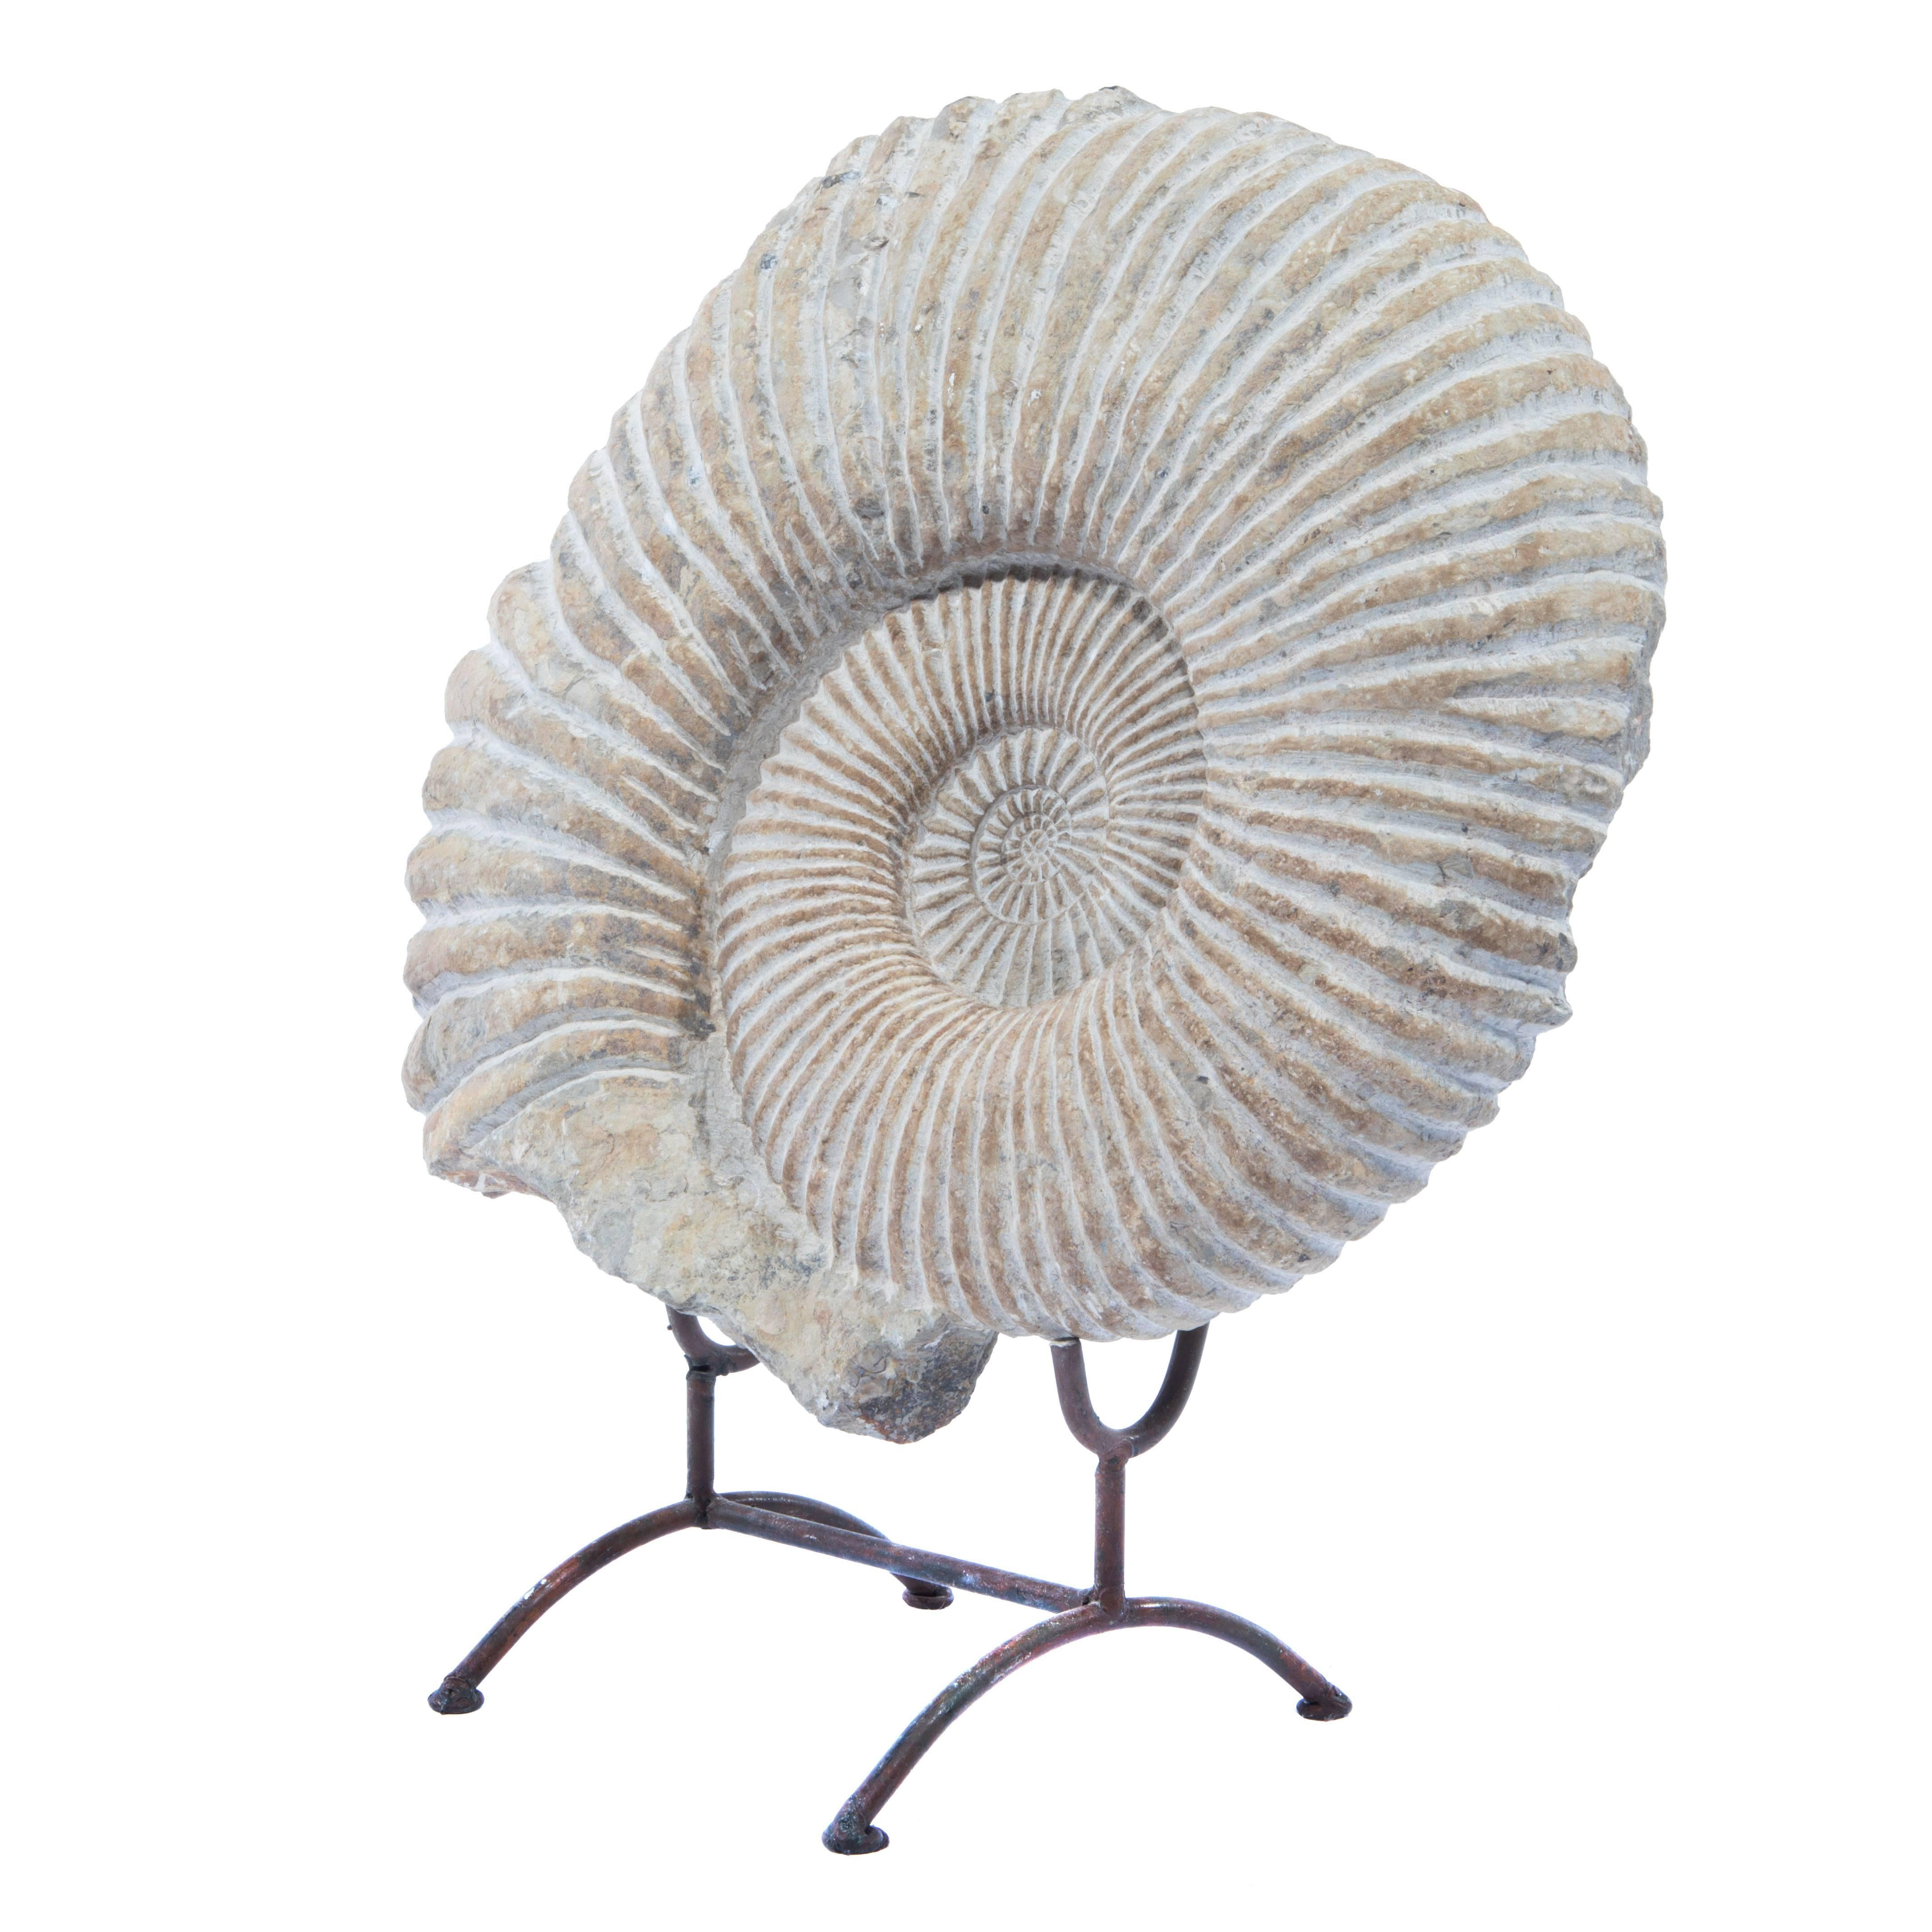 Large Ammonite Fossil on Stand im Zustand „Hervorragend“ in Brooklyn, NY